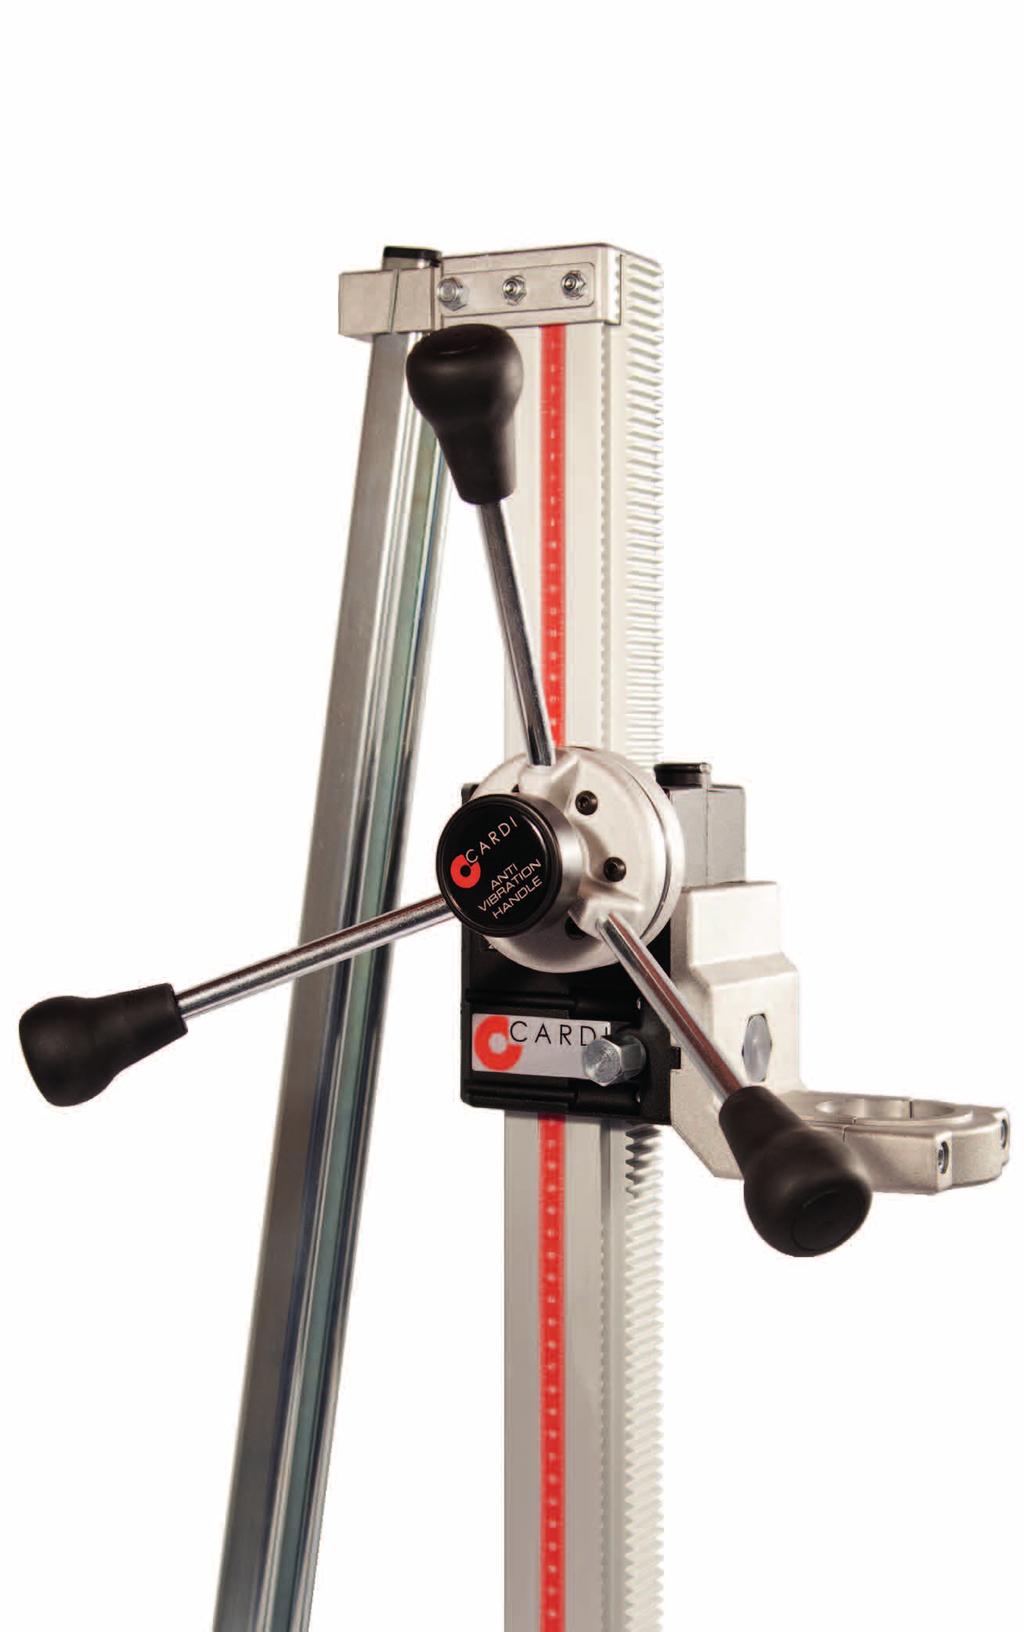 LDP 200-2 ANTI-VIBRATION CORE DRILL STAND FOR